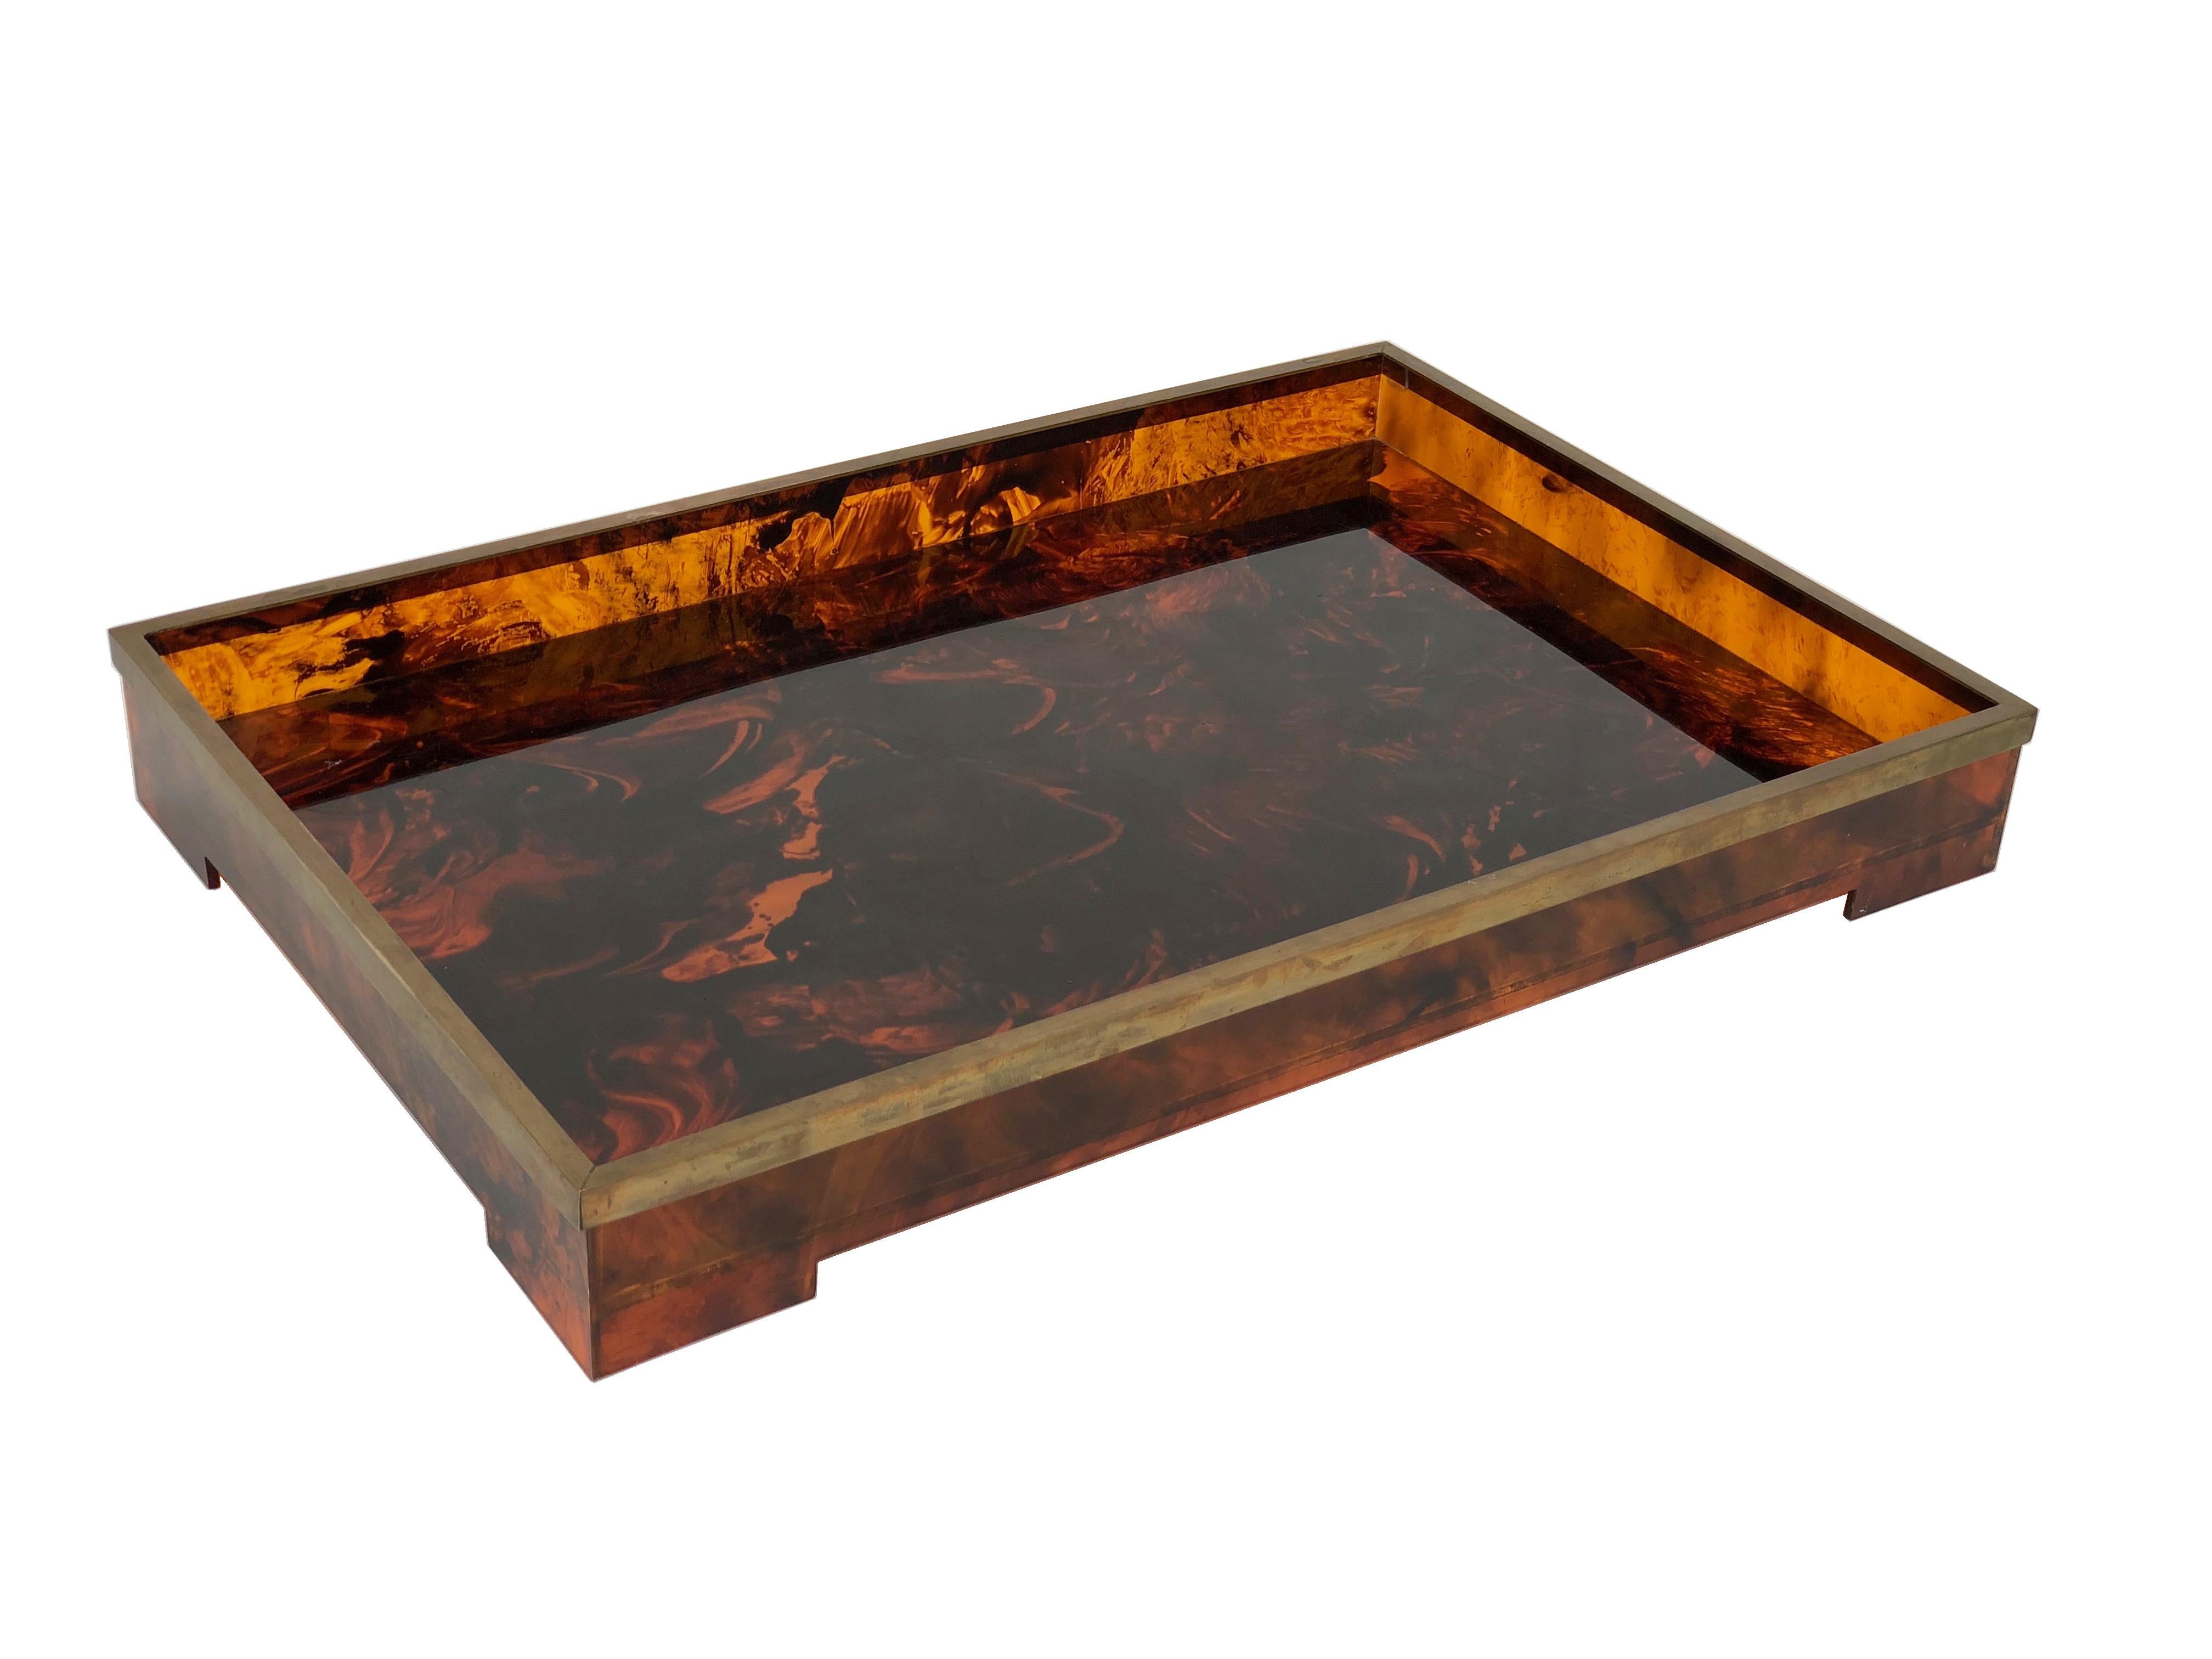 Tortoiseshell serving tray, lucite and brass, Willy Rizzo style, Italy 1970s.